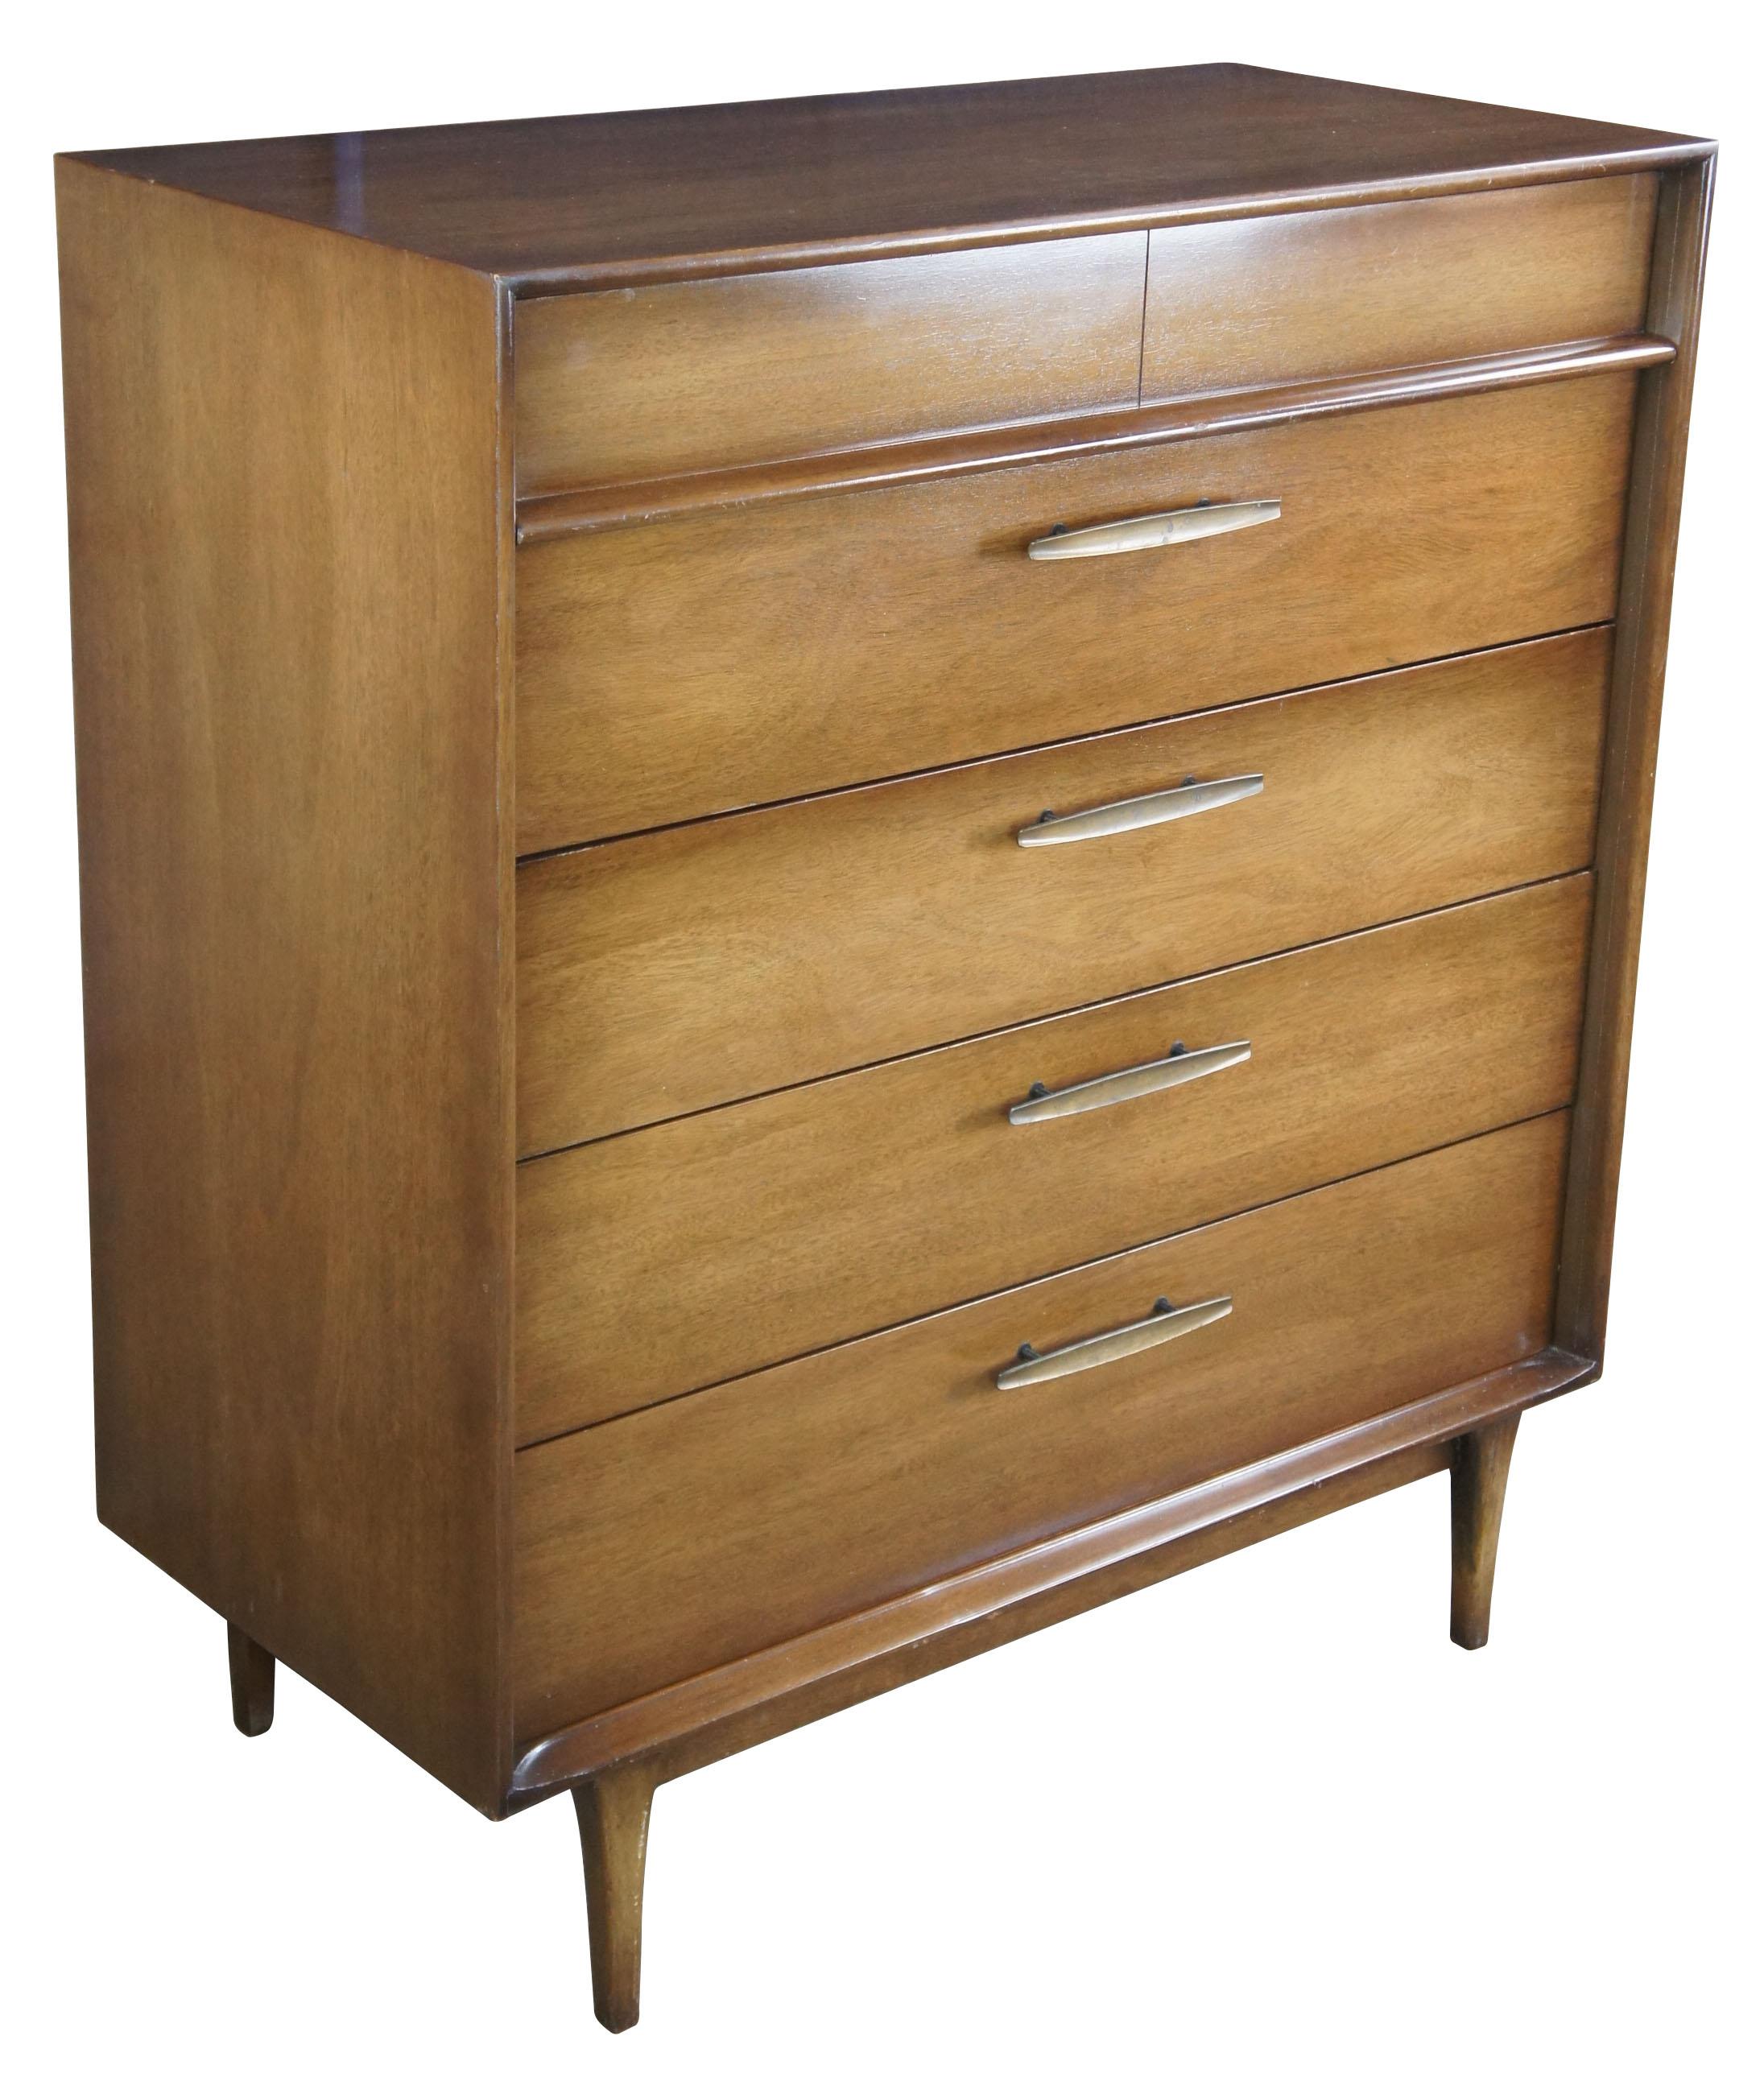 Mid-Century Modern red lion table co dresser or chest of drawers. Made from walnut featuring five drawers supported by tapered legs.
 